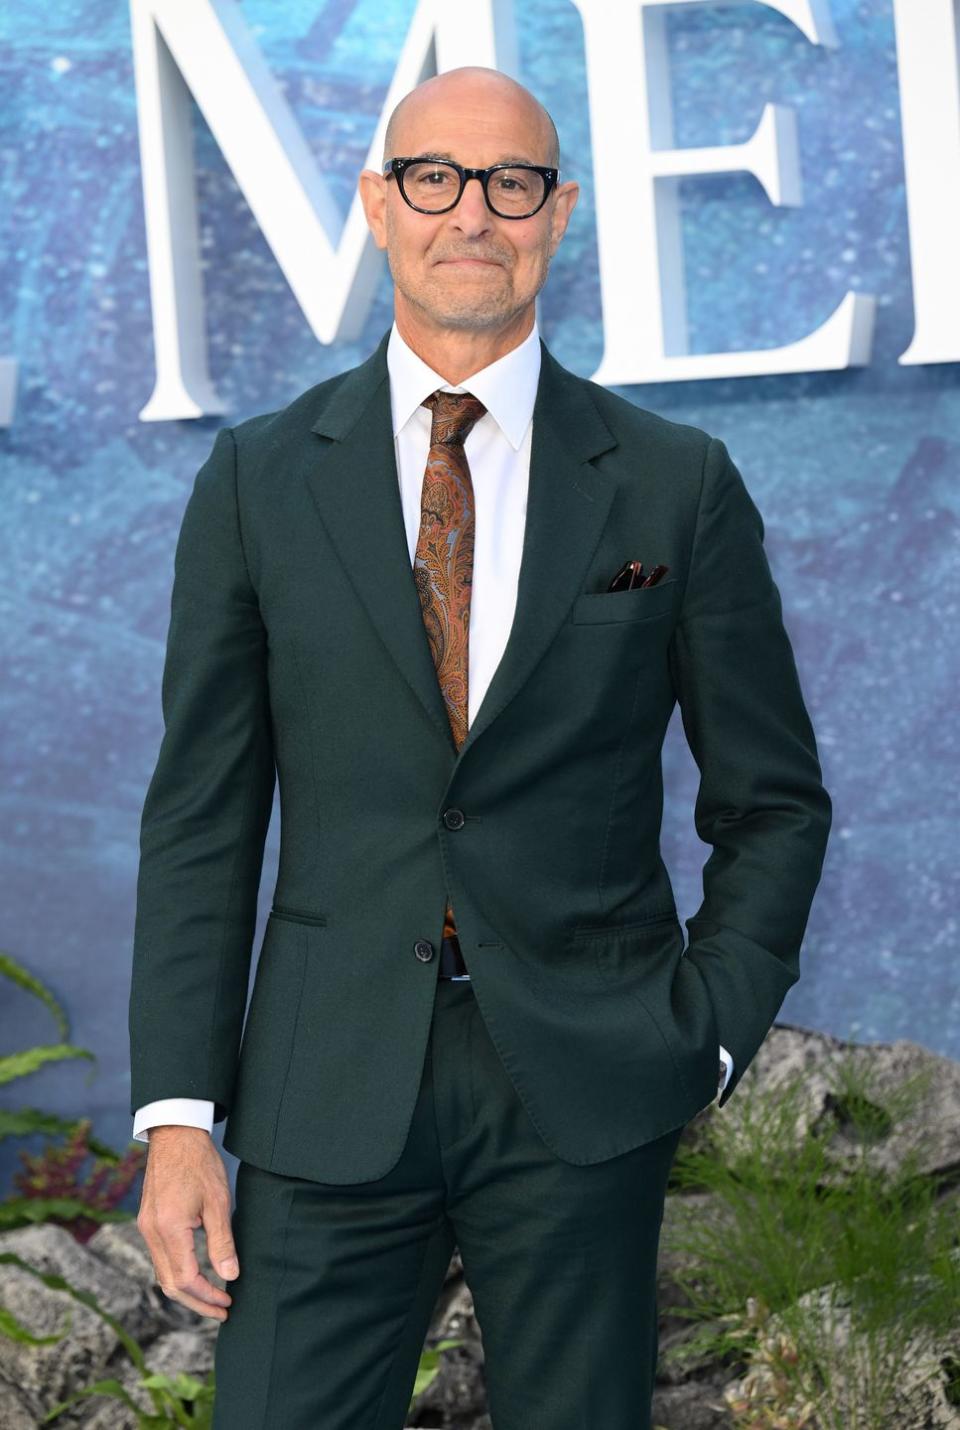 stanley tucci wearing a suit with a brown and orange paisley print tie and glasses on the red carpet at the little mermaid uk premiere